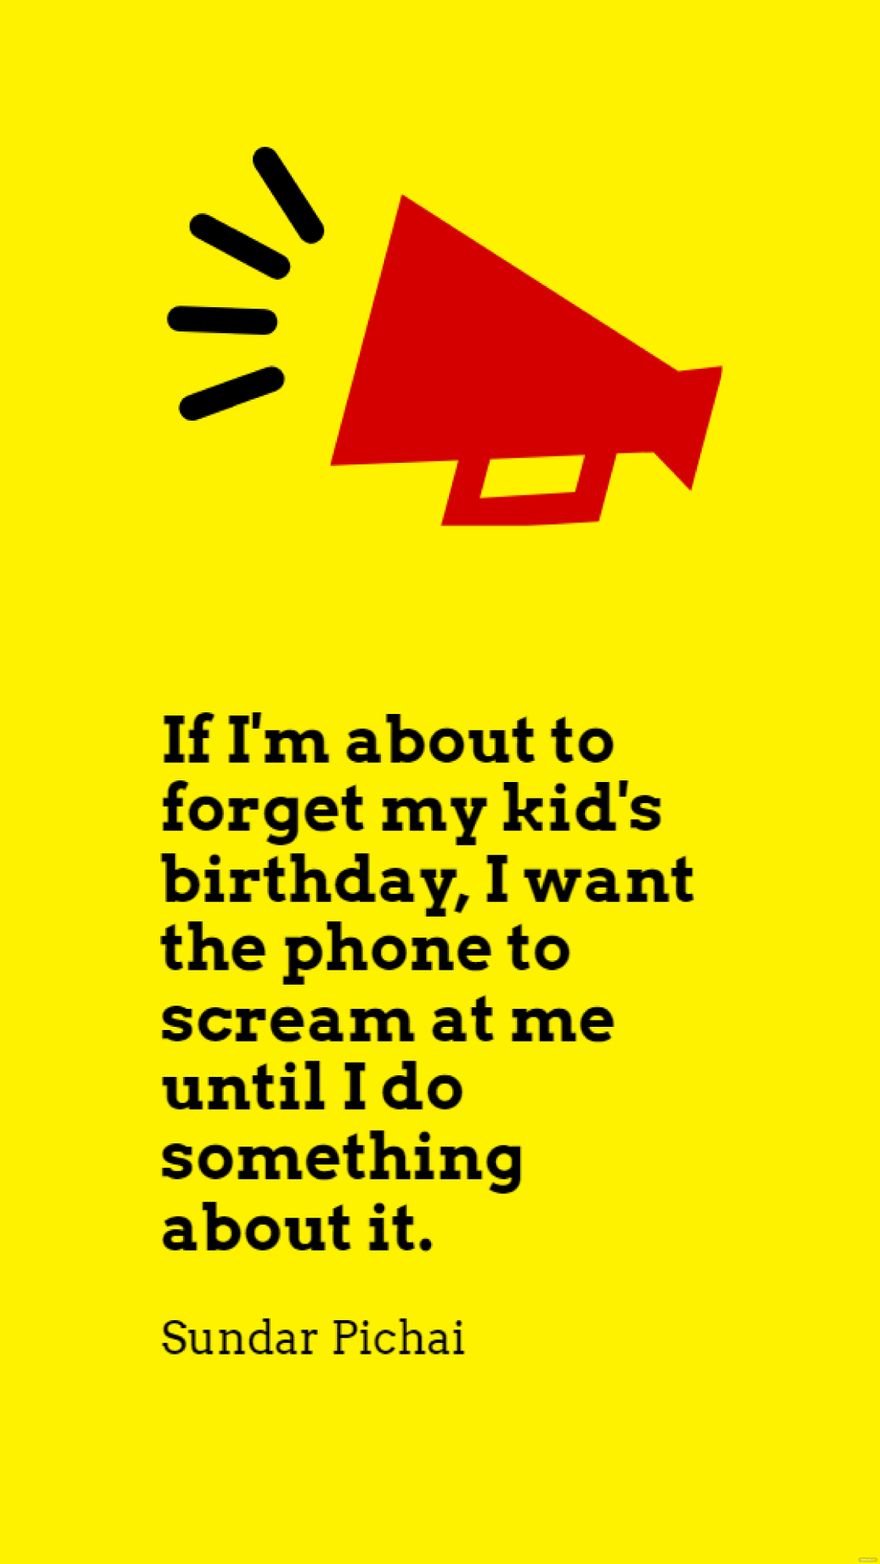 Free Sundar Pichai - If I'm about to forget my kid's birthday, I want the phone to scream at me until I do something about it.